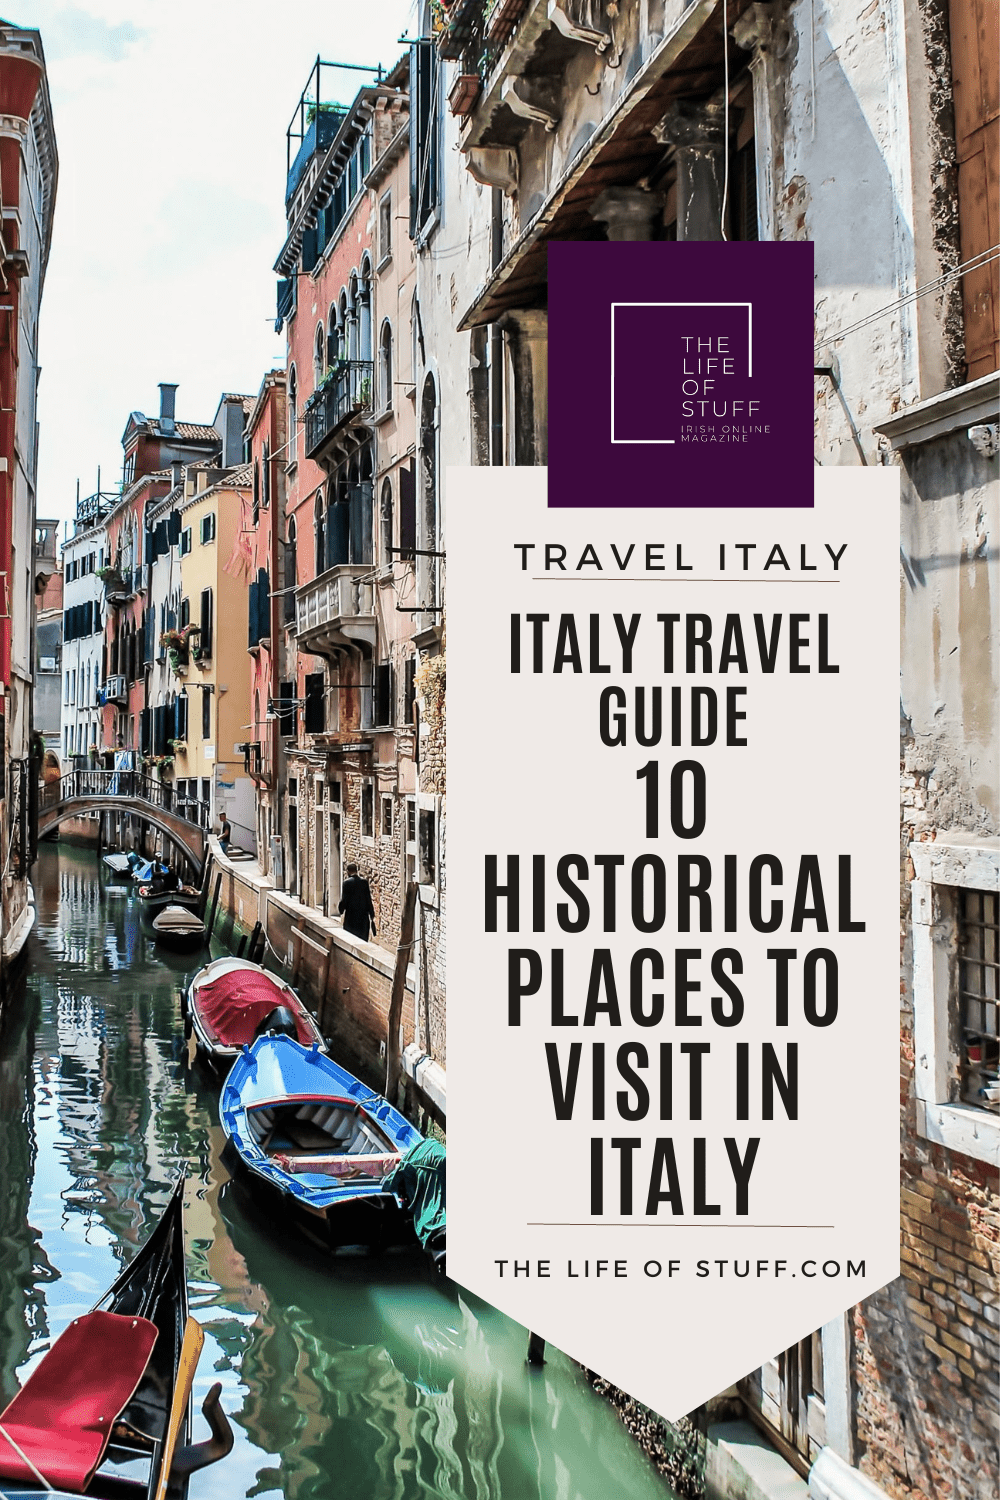 Italy Travel Guide - 10 Historical Places to Visit in Italy - The Life of Stuff